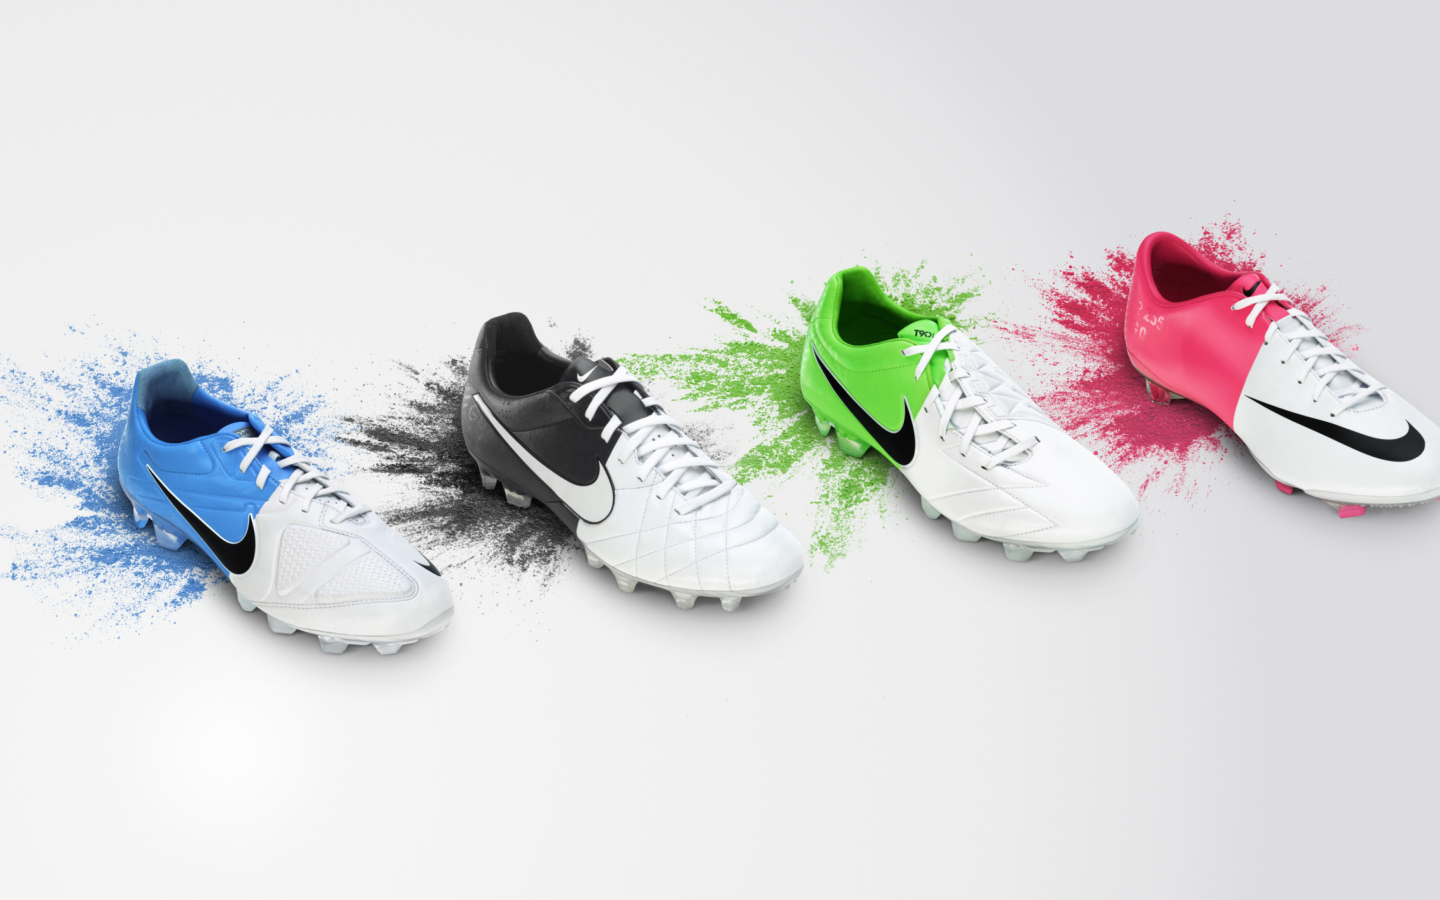 Nike - Clash Collection wallpaper 1440x900